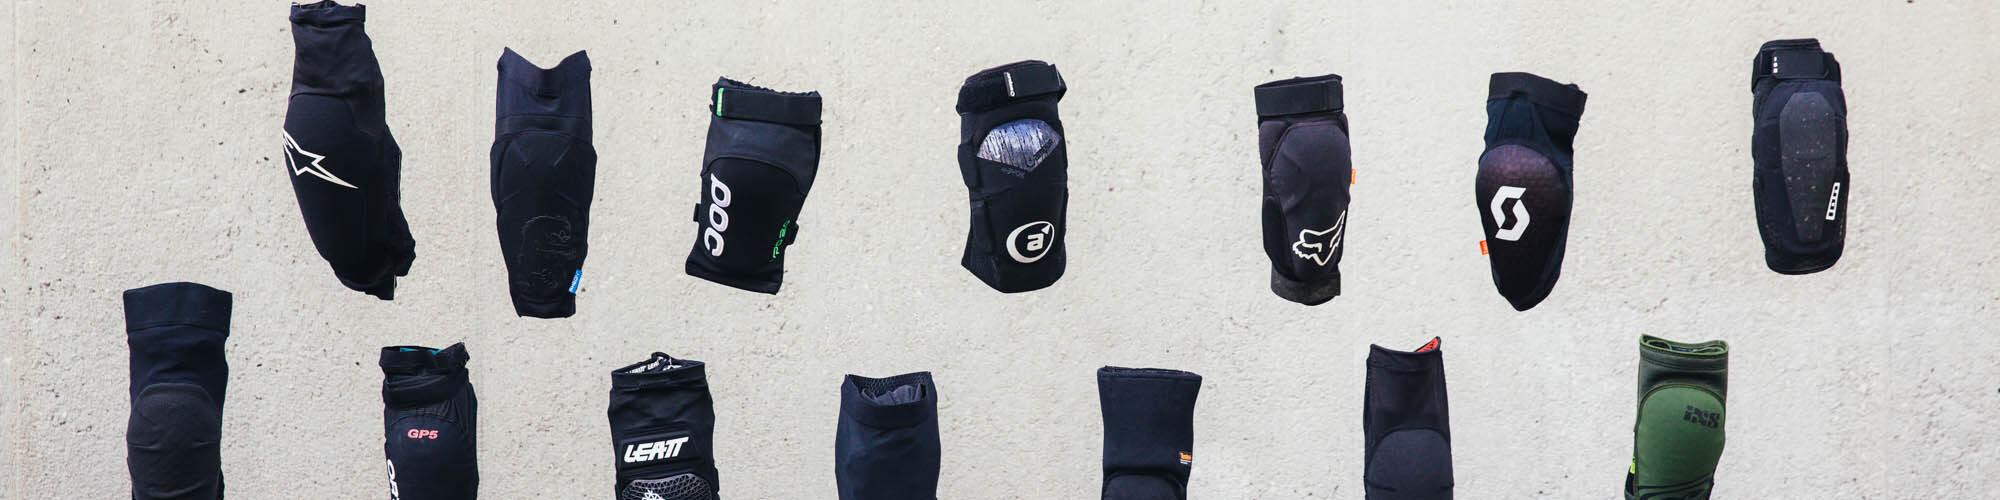 14 trail knee pads in direct comparison – Which knee pads strike